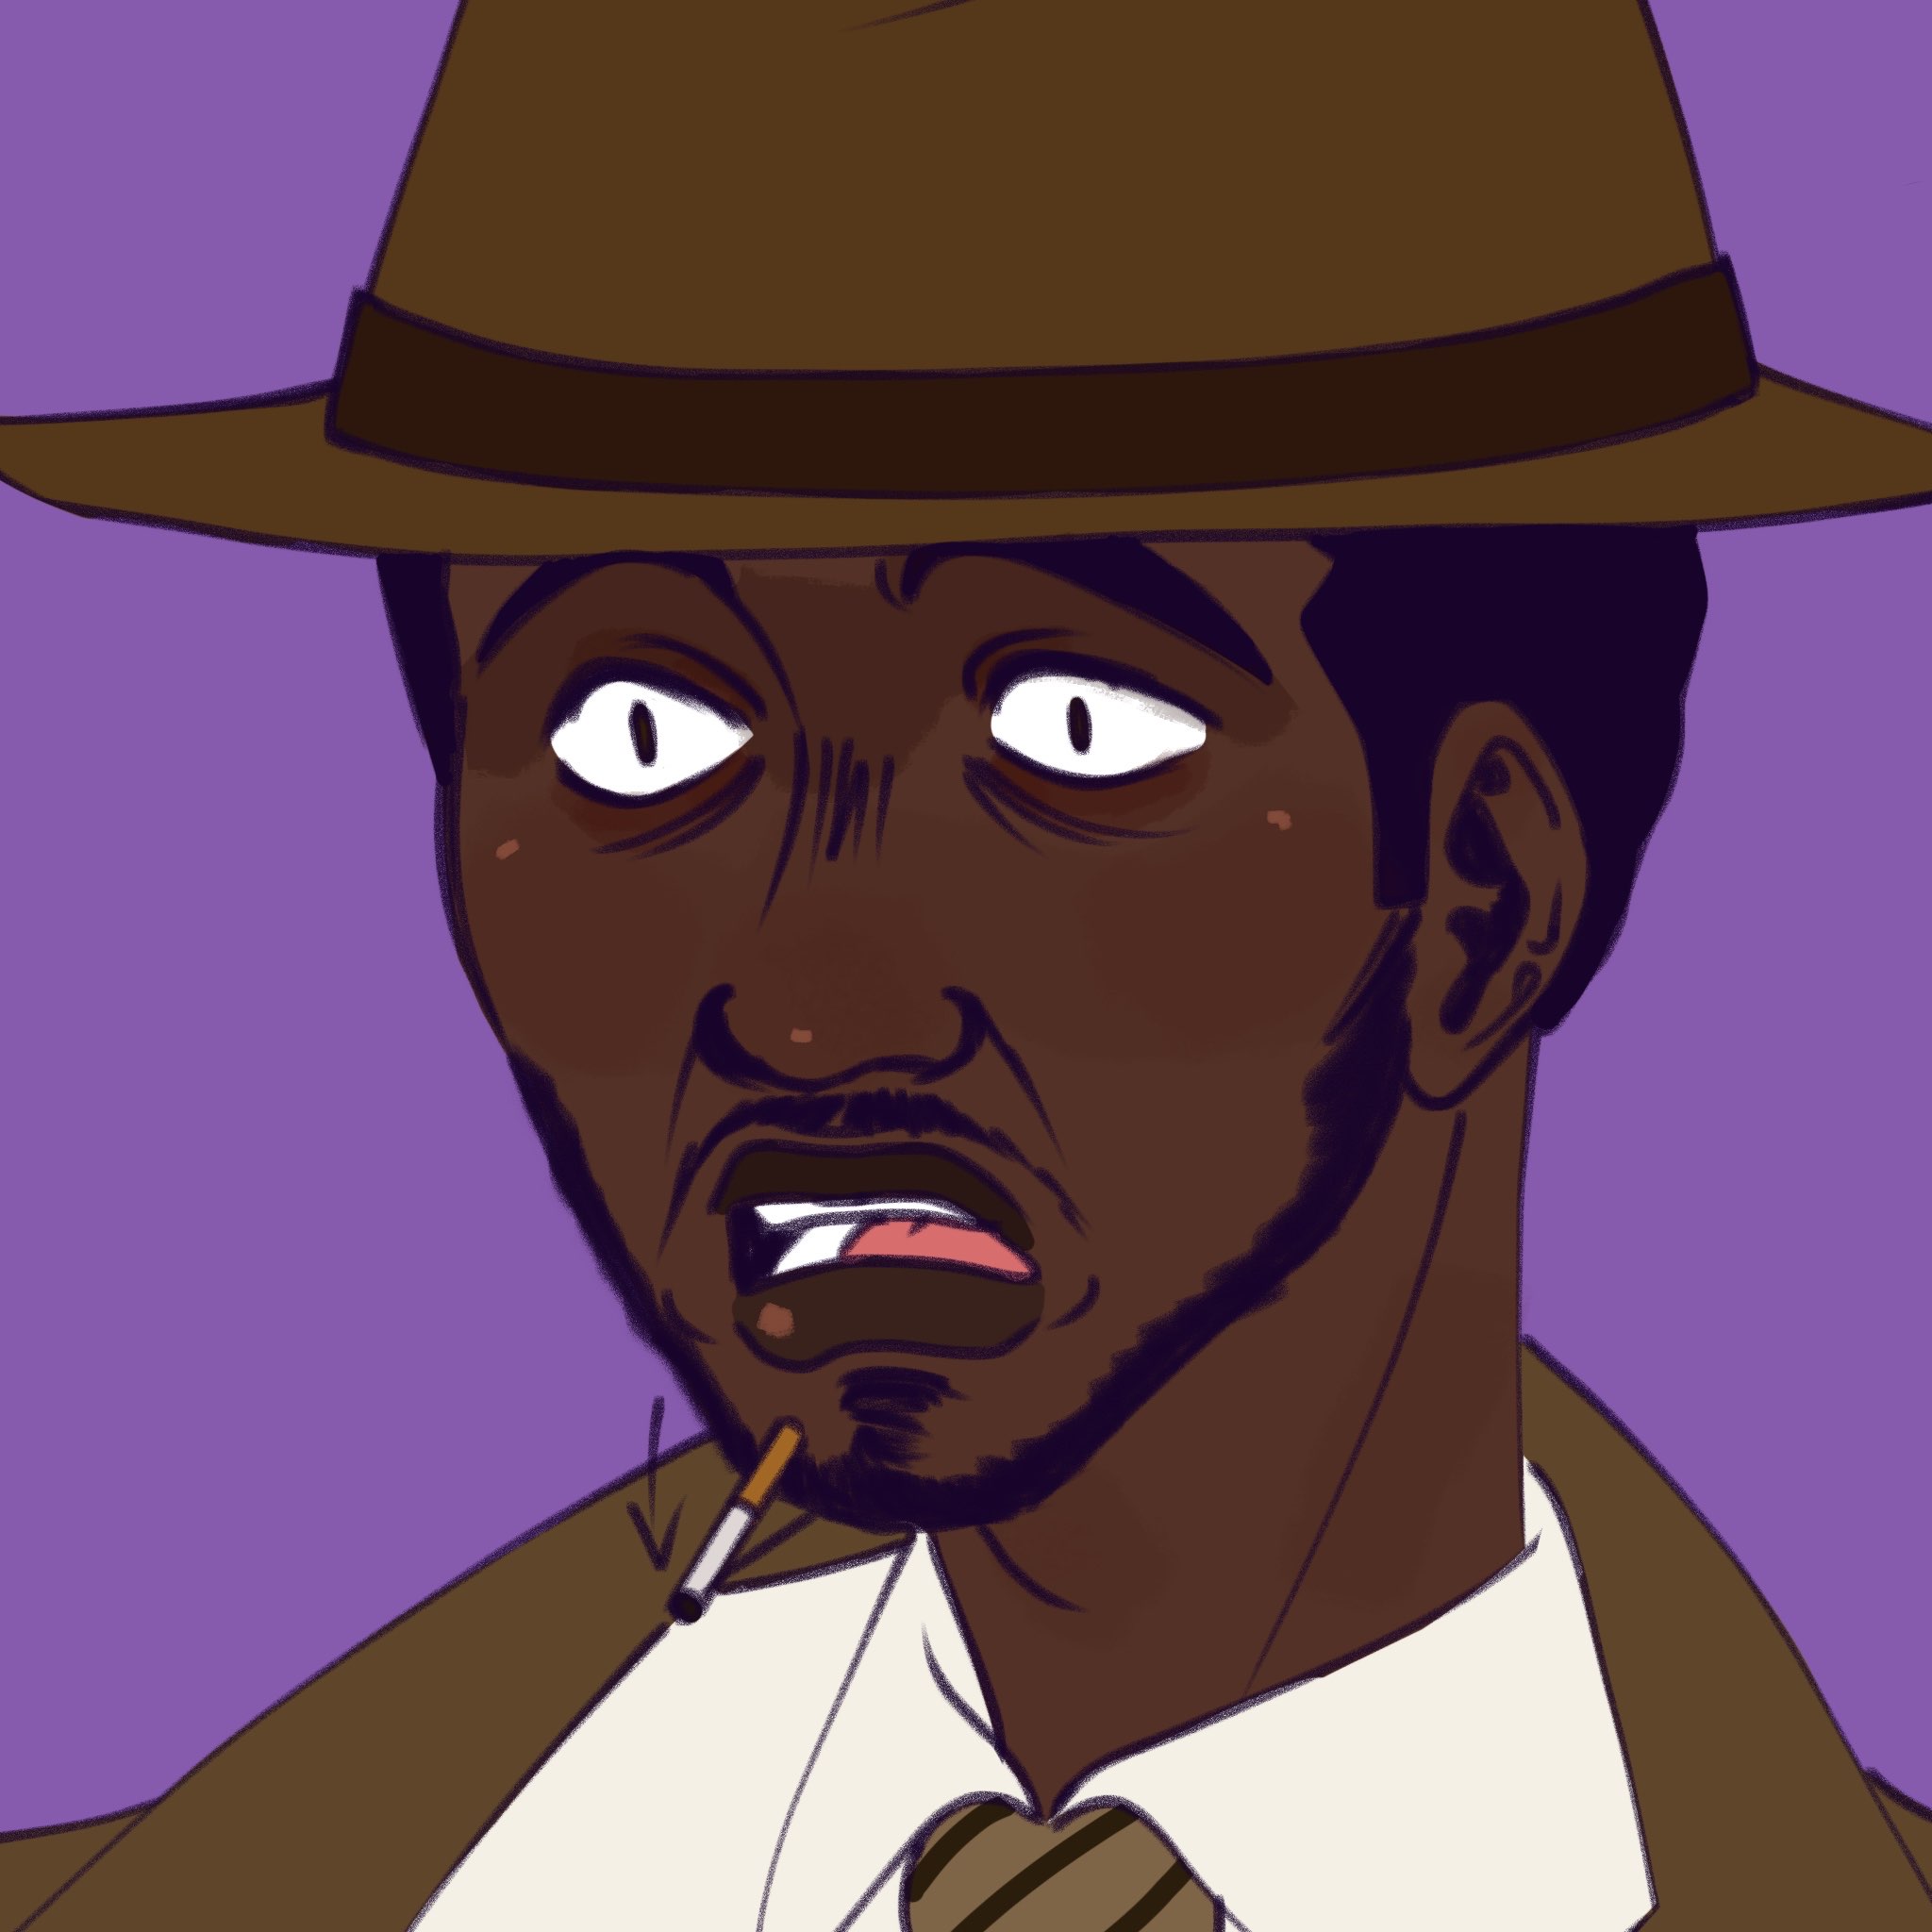 Detective Stewart expression (1) (Harmony and Horror)